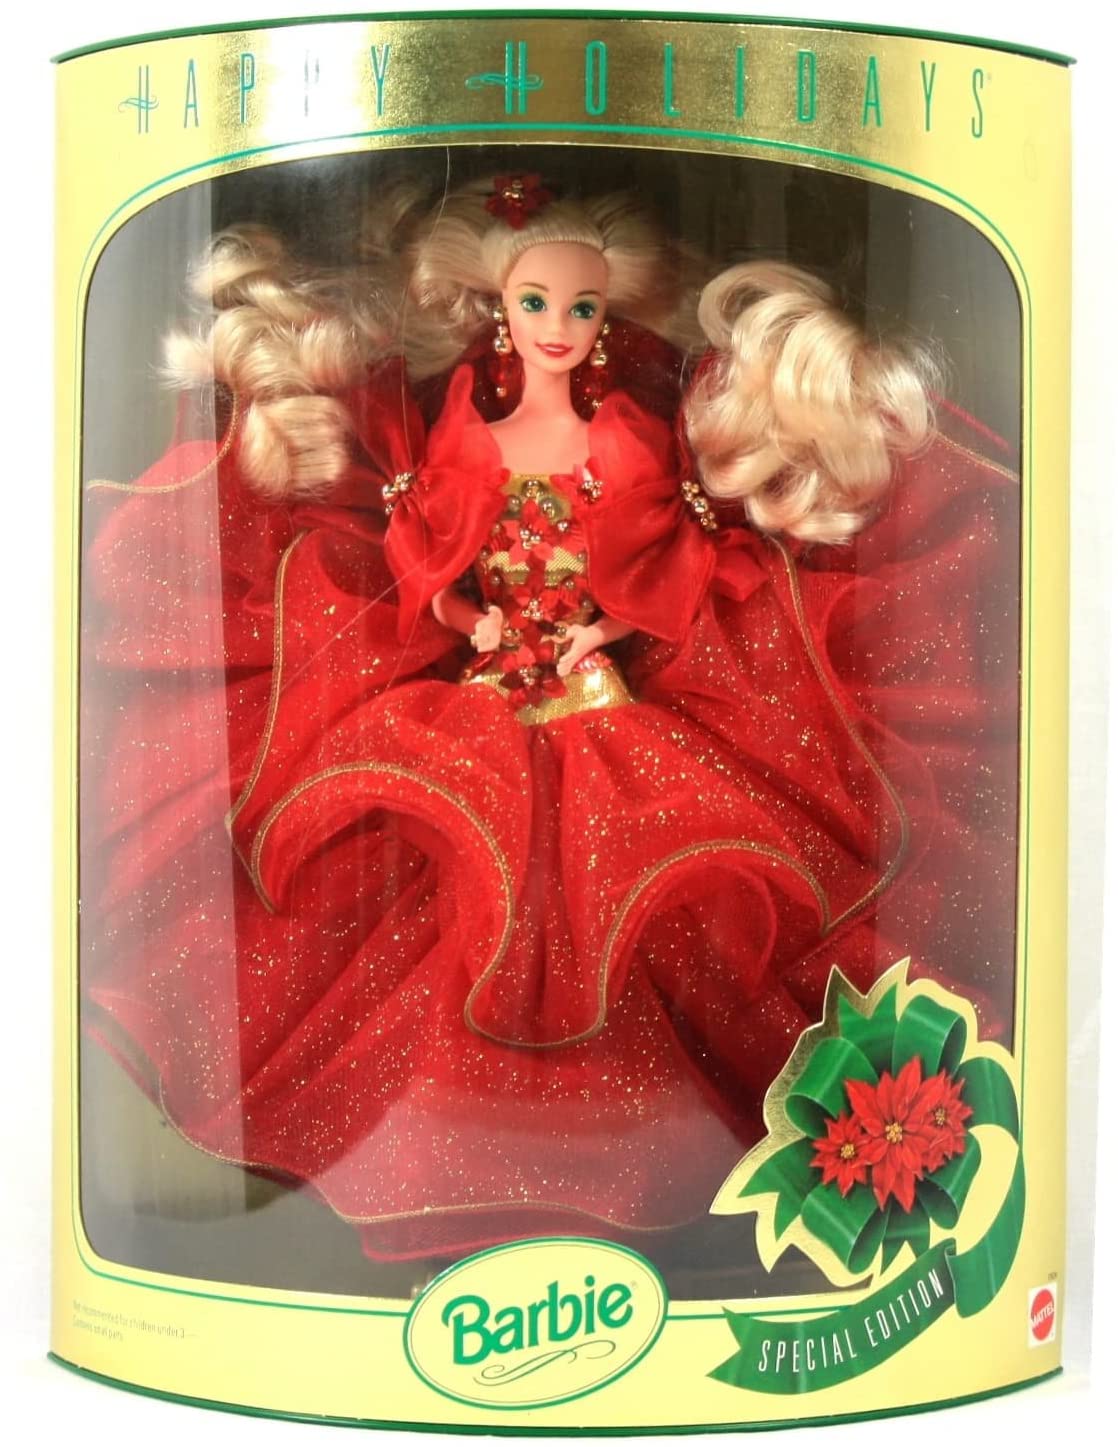 Barbie 1993 Happy Holidays: Sell2BBNovelties.com: Sell TY Beanie Babies